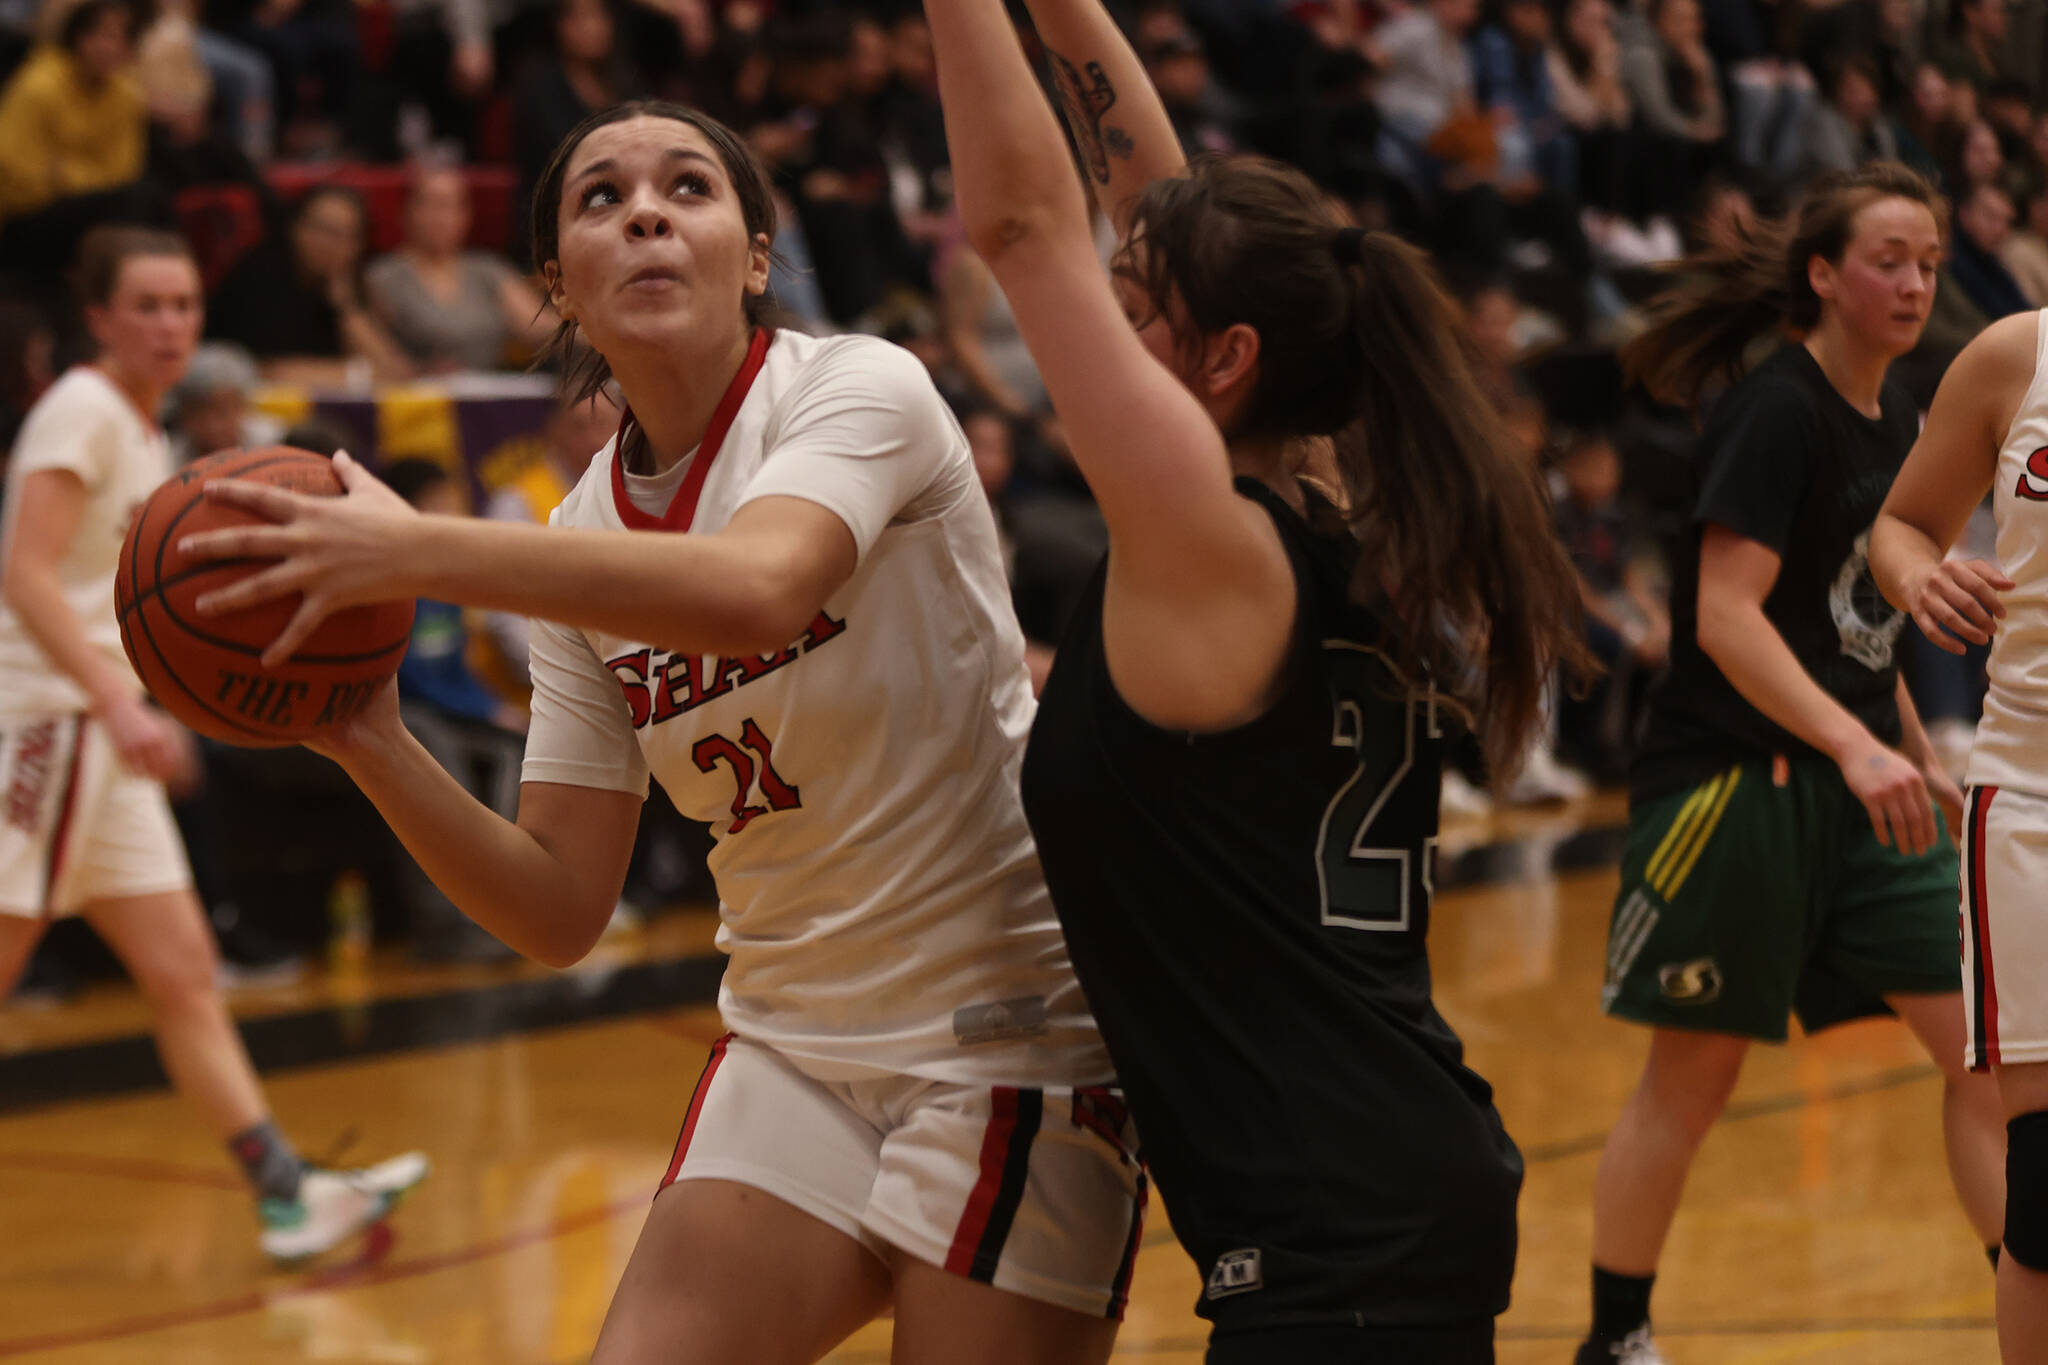 Hoonah’s Mackenzie Nichols (21) eyes the hoop while defended by Prince of Wales’ Michaela Demmert in the first half of a 63-43 Prince of Wales win. (Ben Hohenstatt / Juneau Empire)